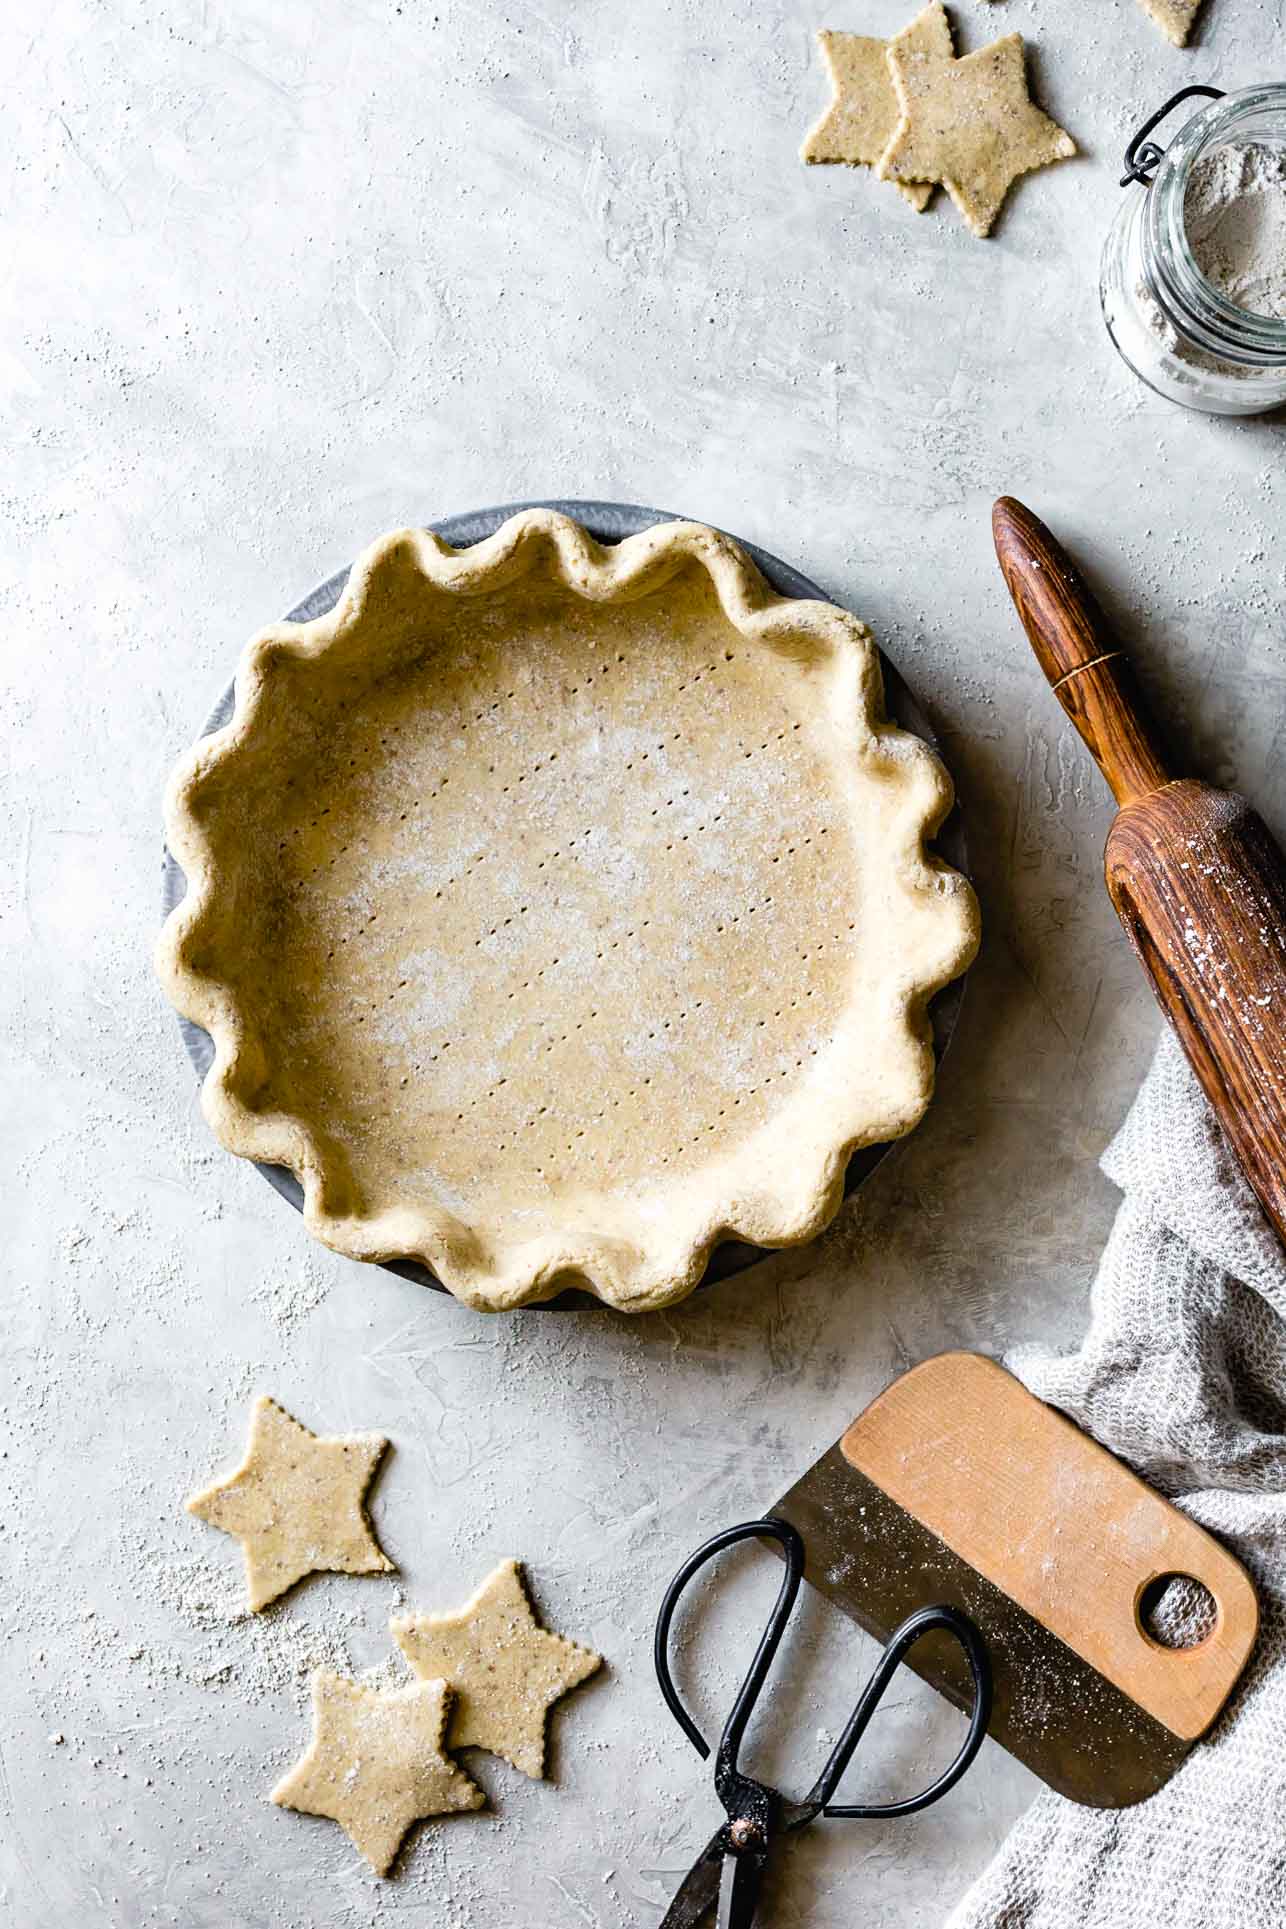 A handsome, unbaked gluten-free pie crust sits on a plaster surface with star cut-outs, a rolling pin, and a gray dish towel around it